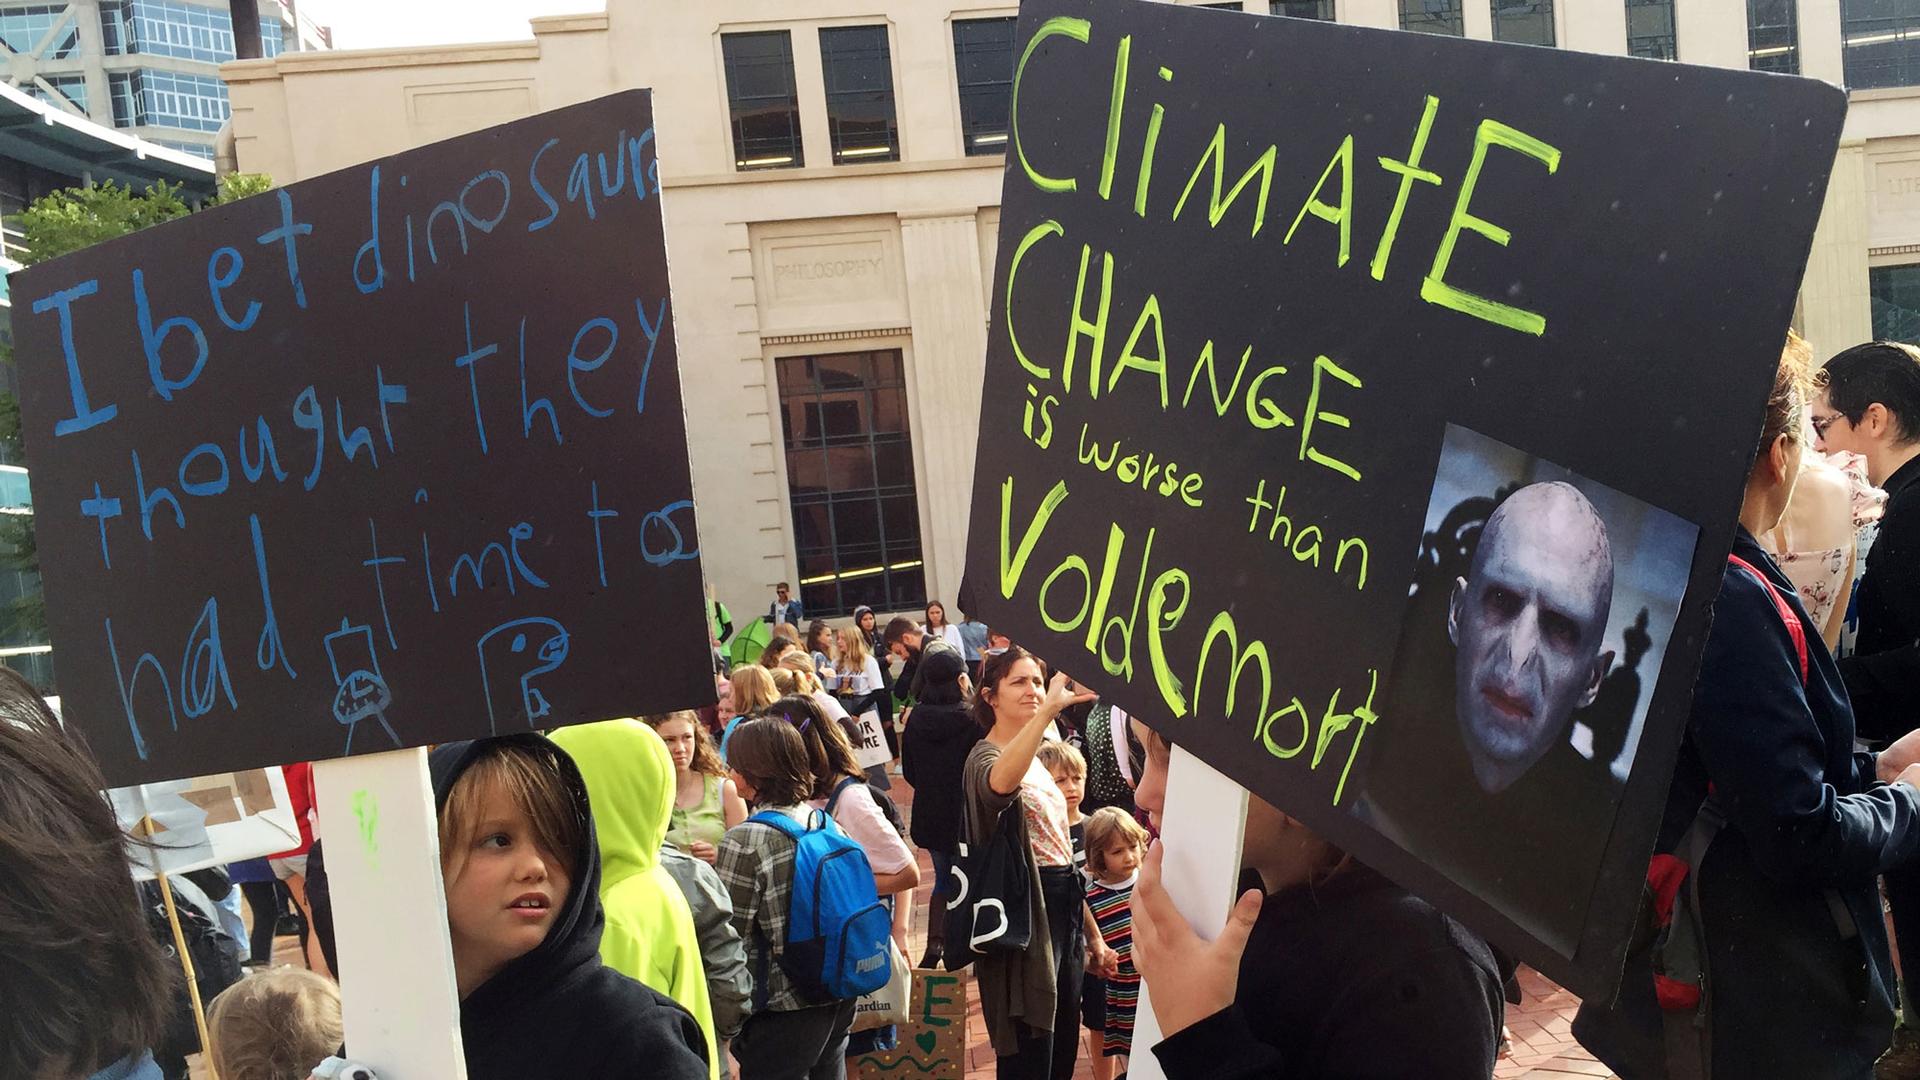 Protesters are shown with placards that read, "Climate change is worse then Voldemort."